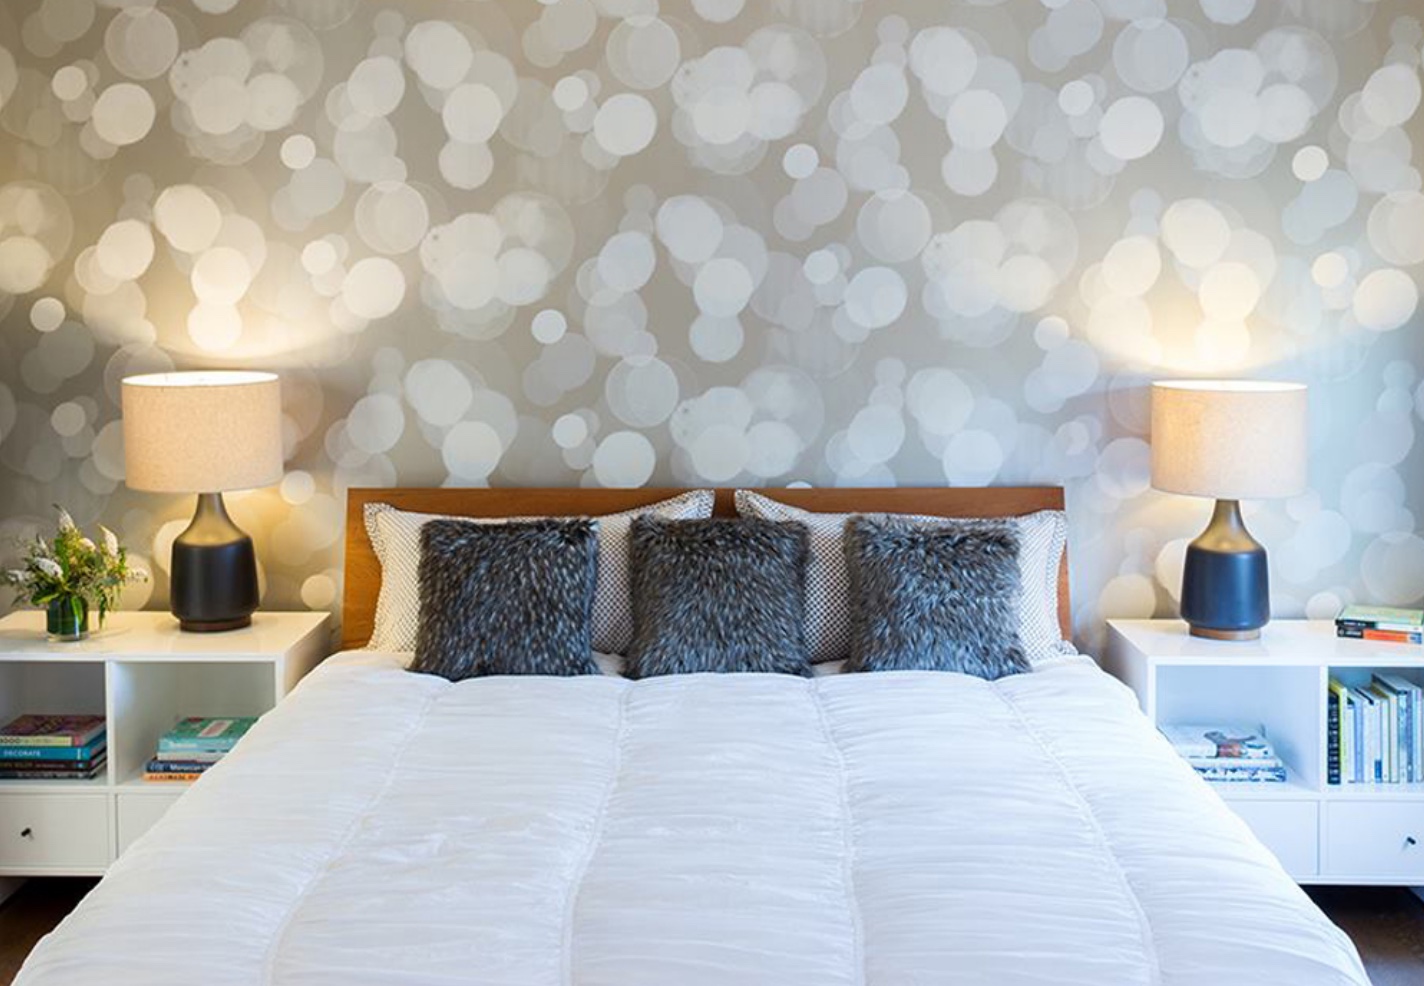 bedroom with wallpaper on wall featuring gray and white haloed lights